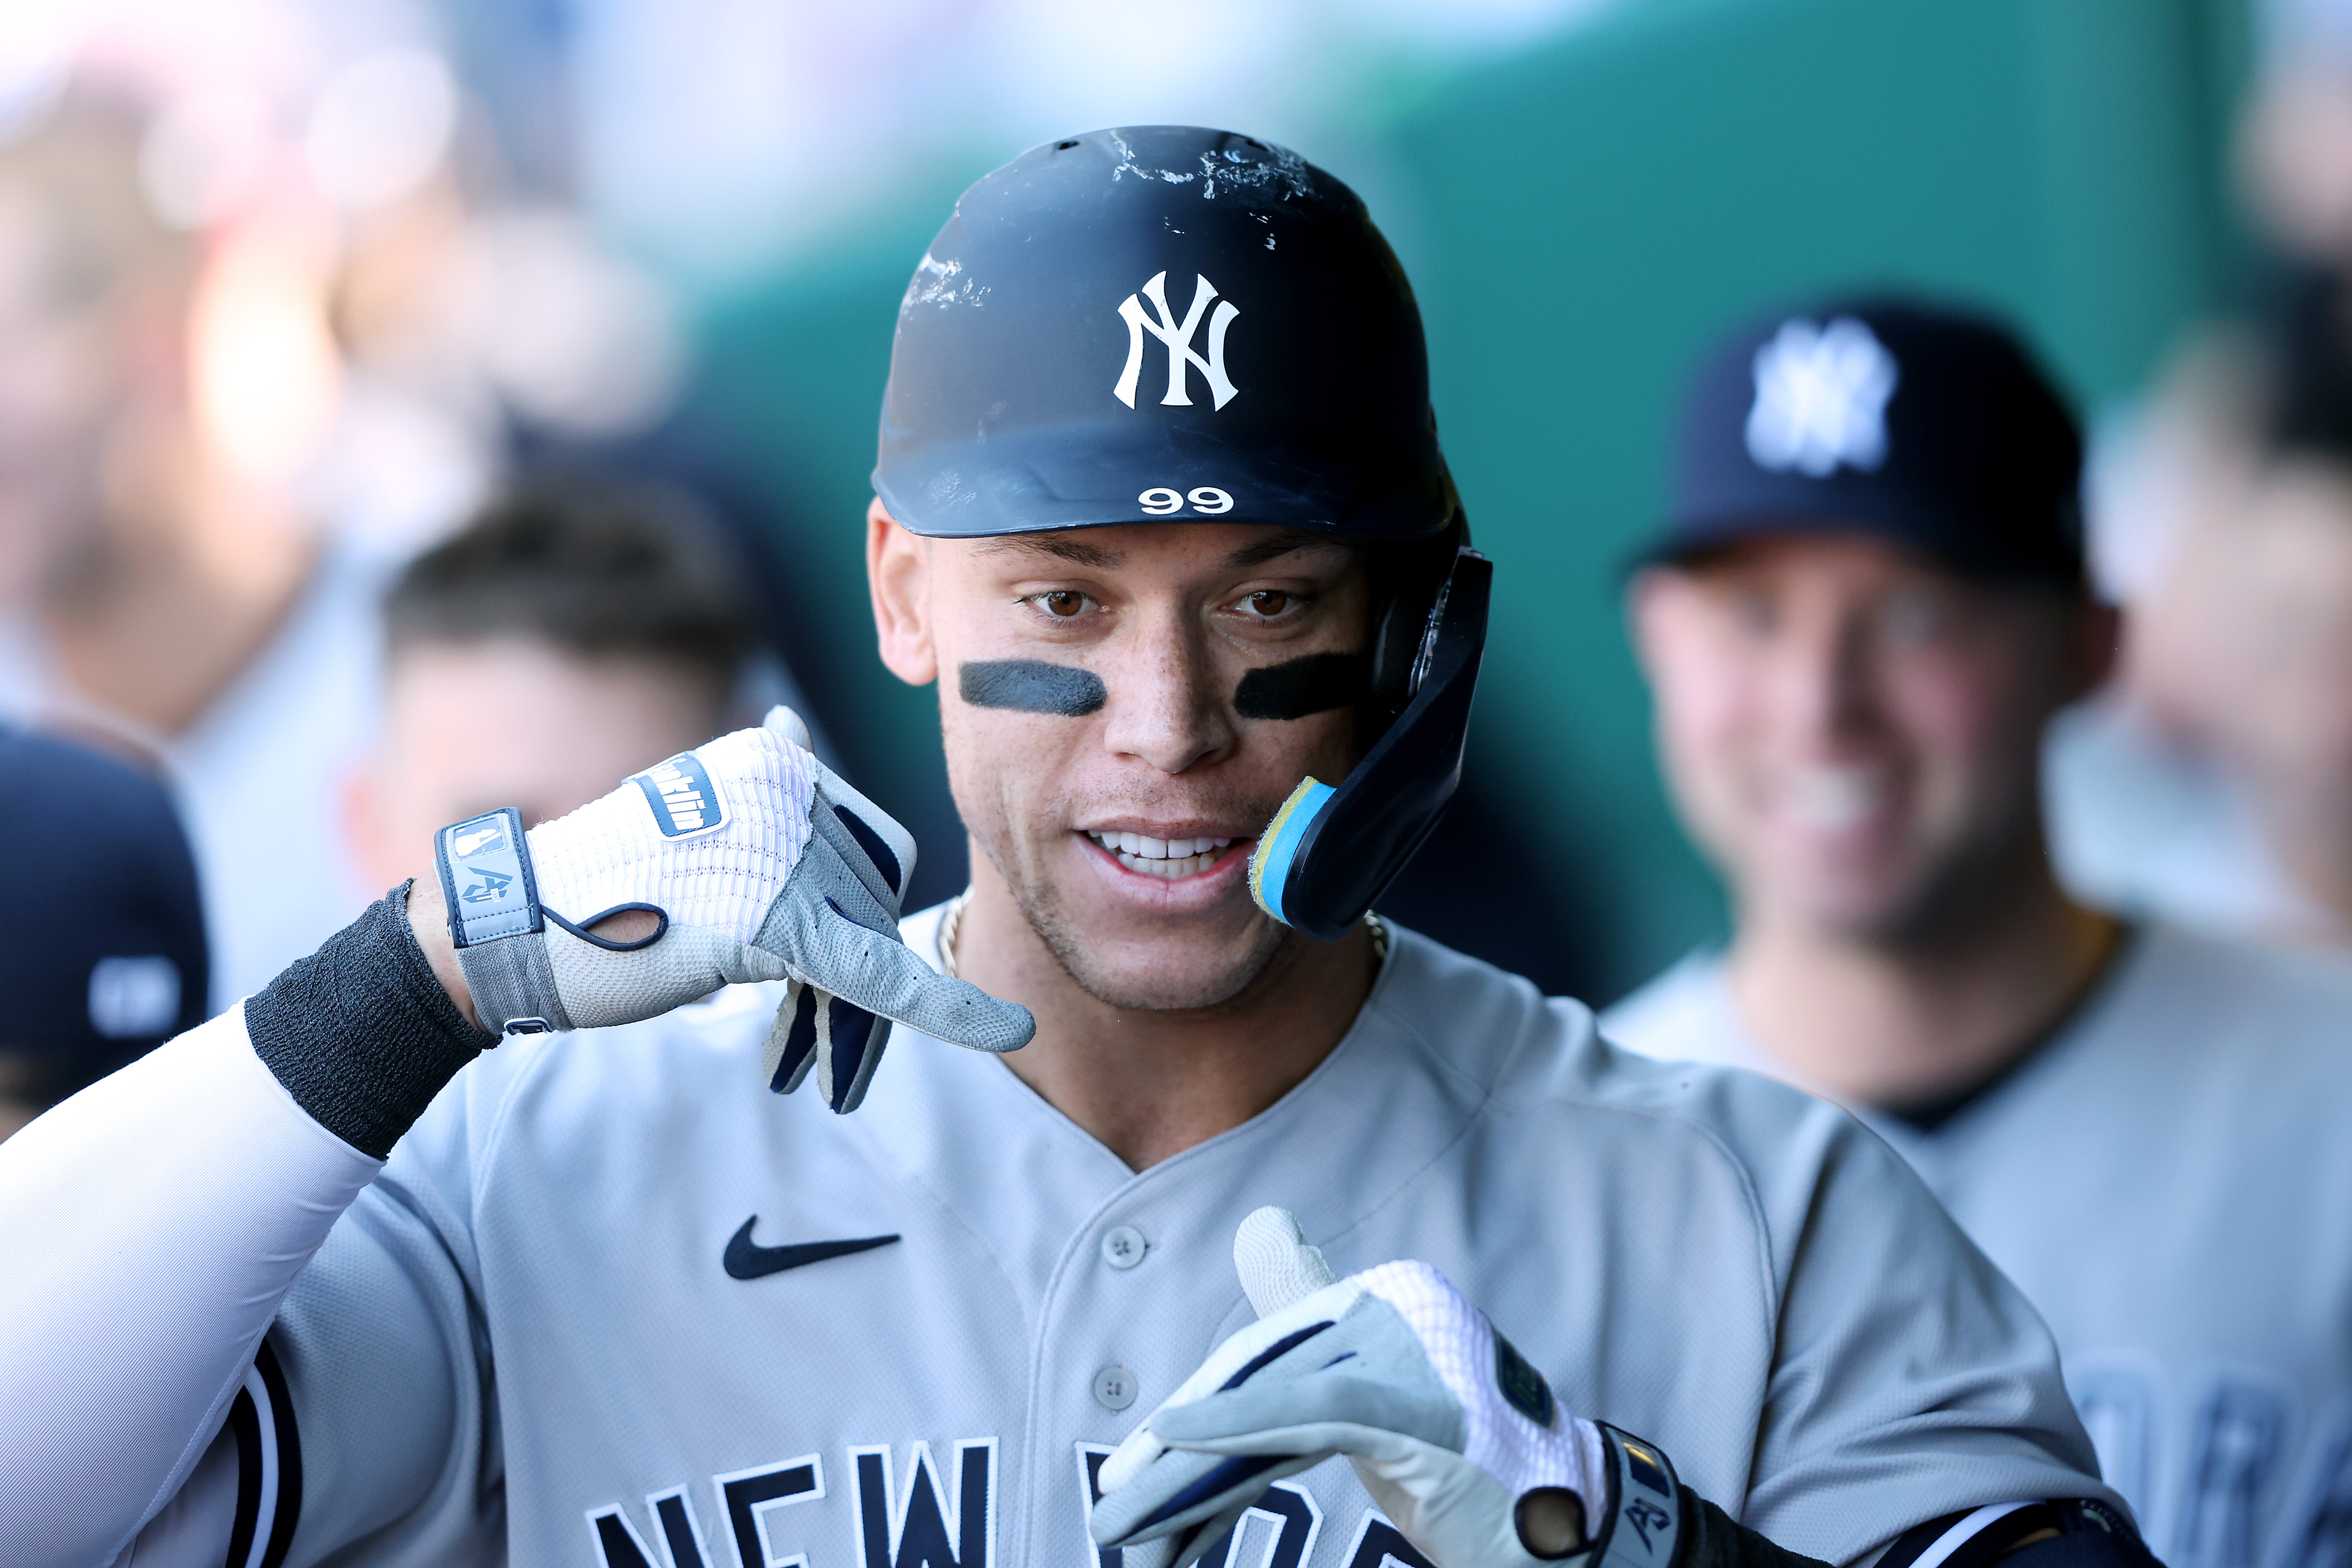 Why Yankees' worst fears are coming true with Aaron Judge injury